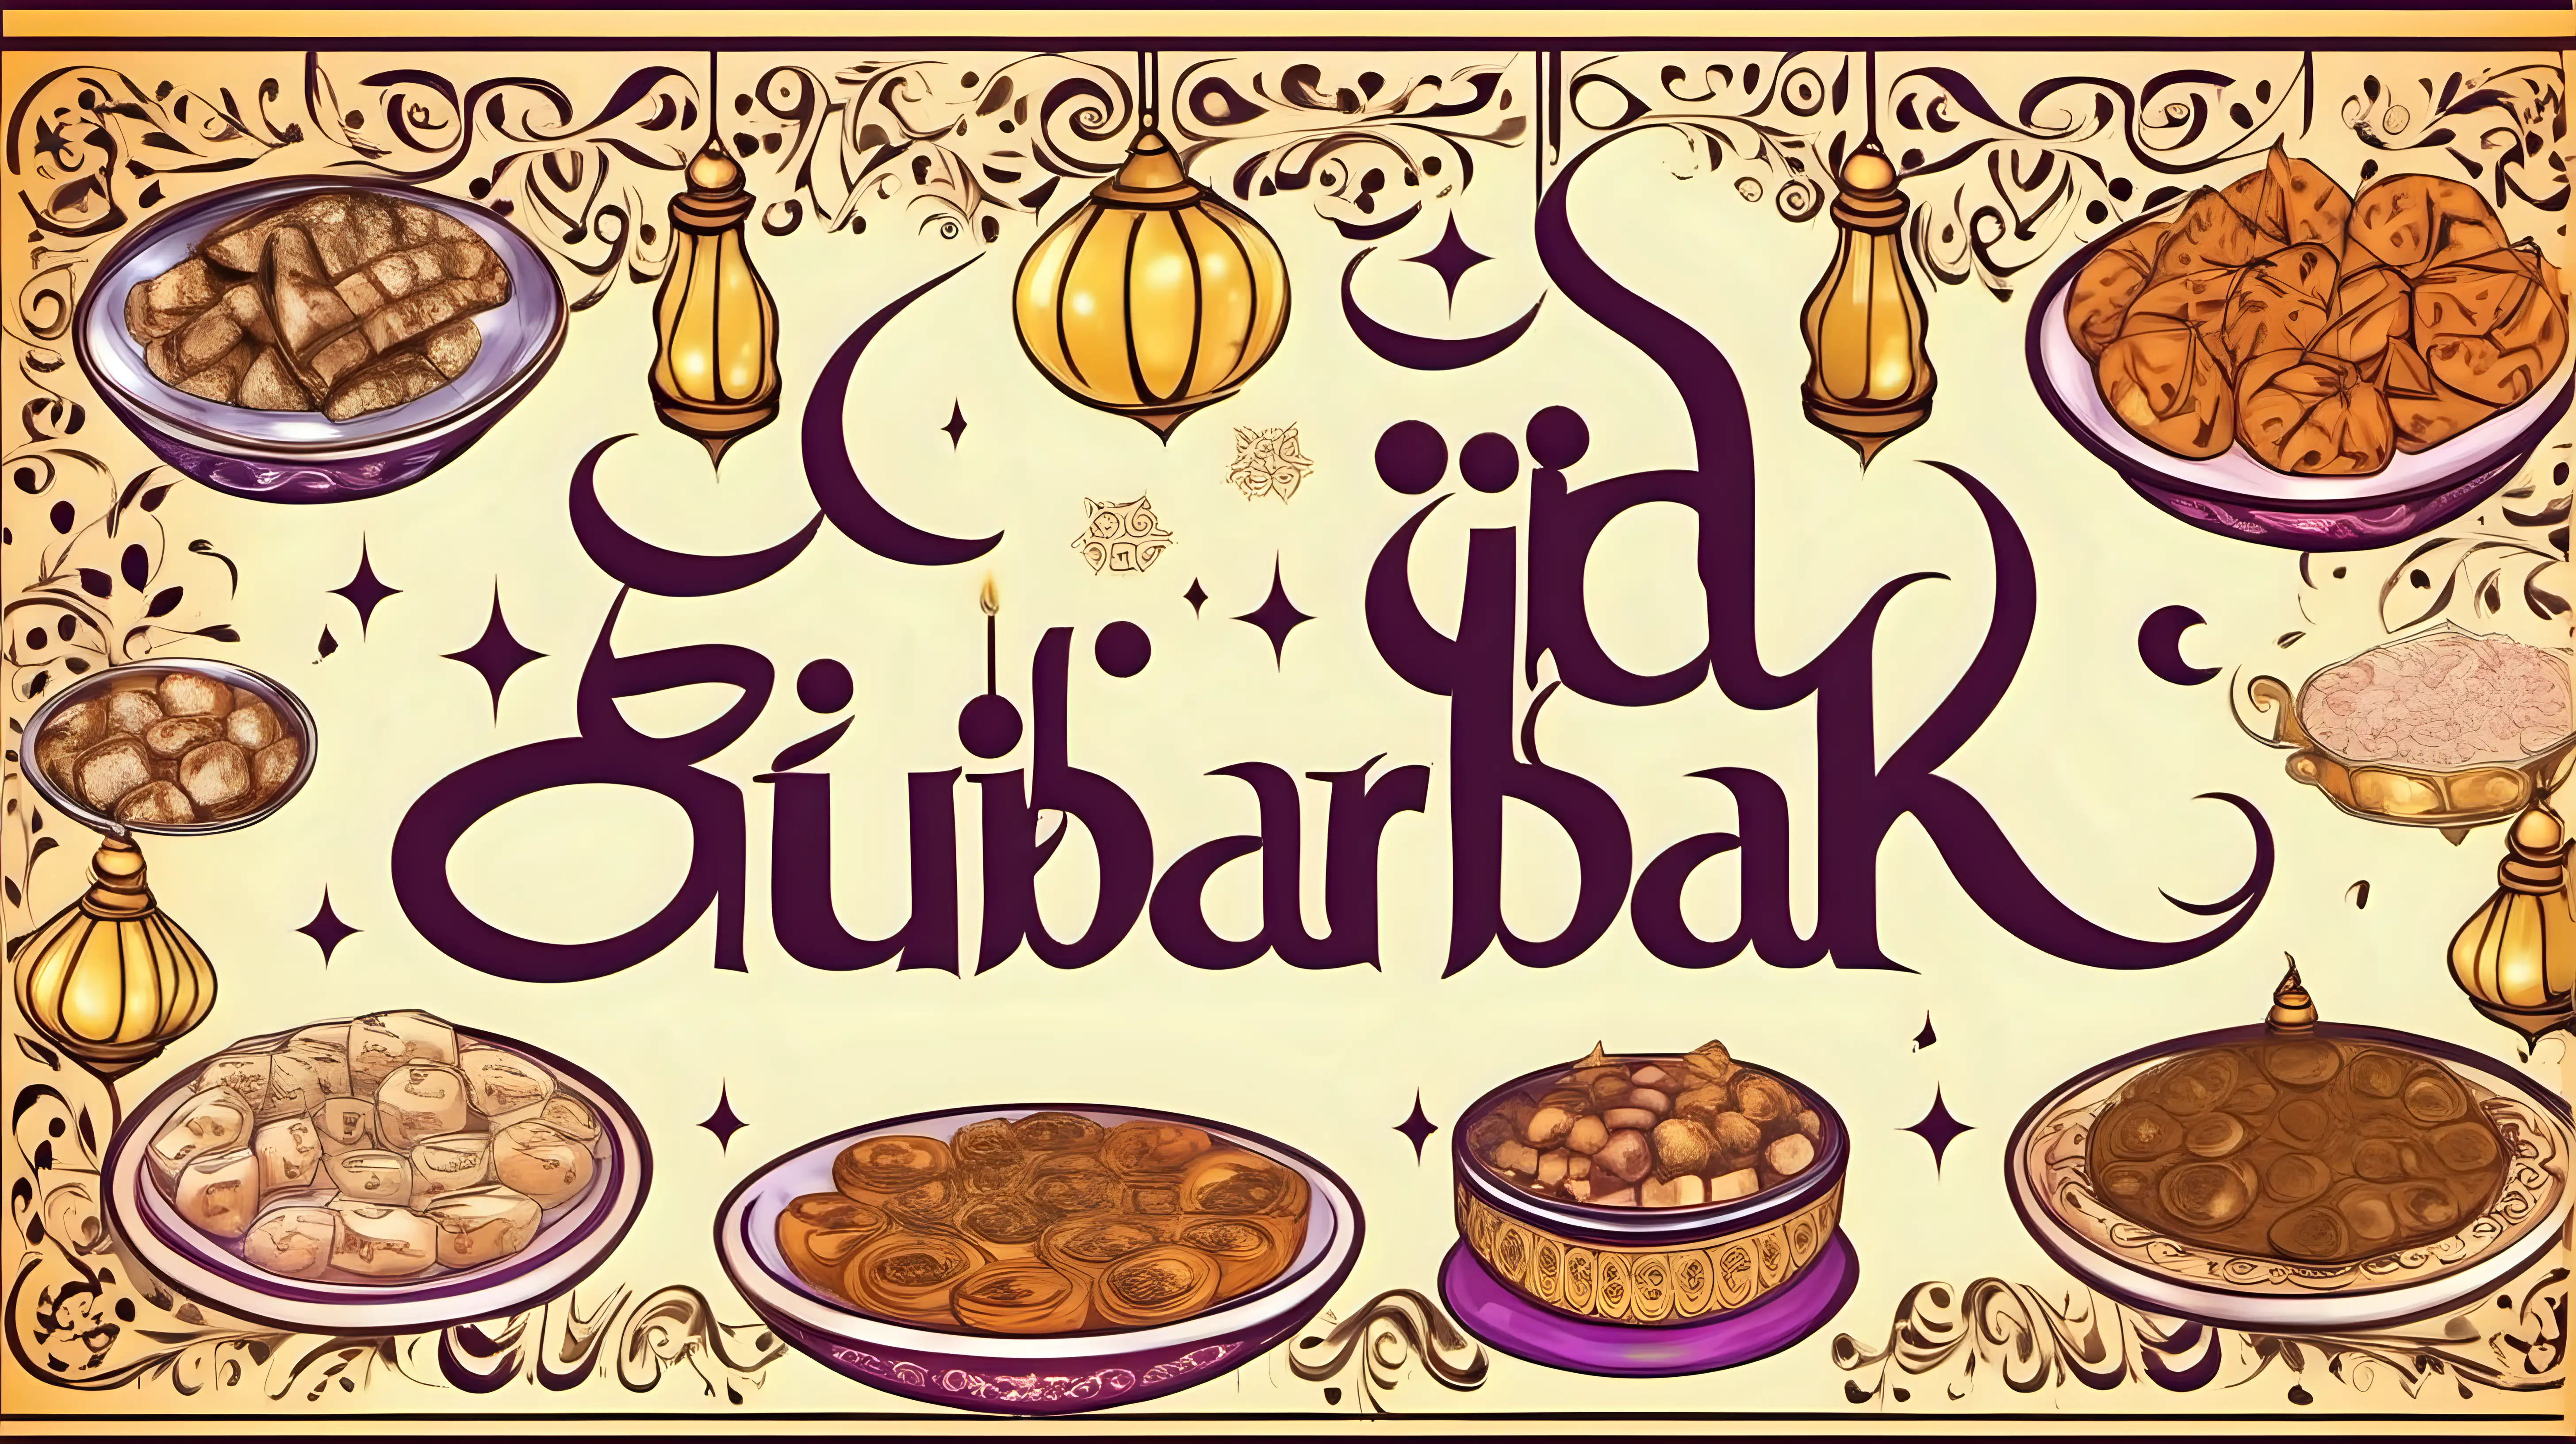 write happy Eid Mubarak in the middle with beautiful style in large fonts and make few dishes around it,carefully write spellings of Eid Mubarak,a magnificent image